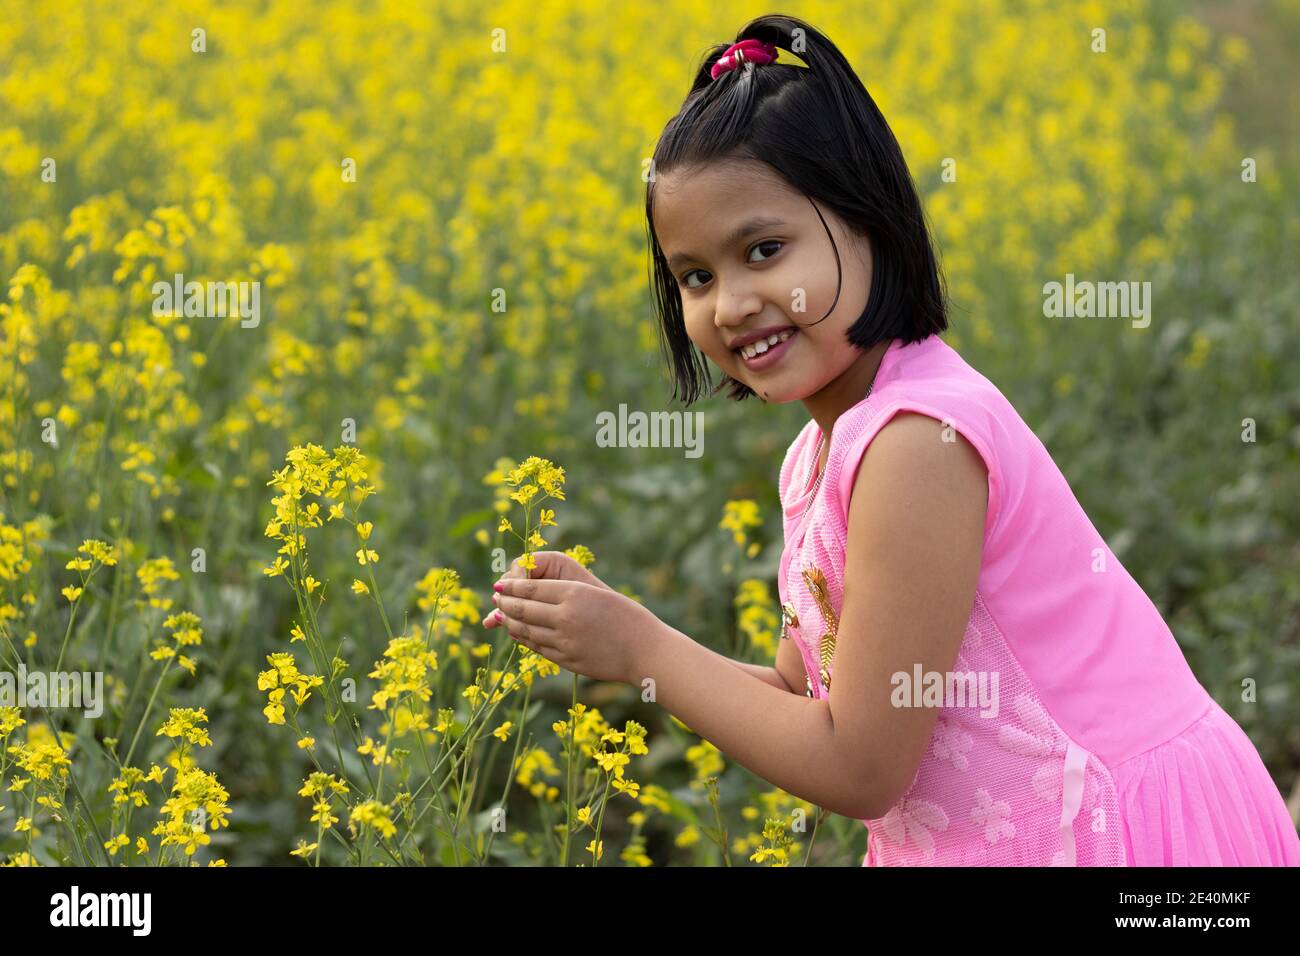 a pretty indian girl child in pink dress standing with a mustard flower in hand near yellow mustard flower field Stock Photo